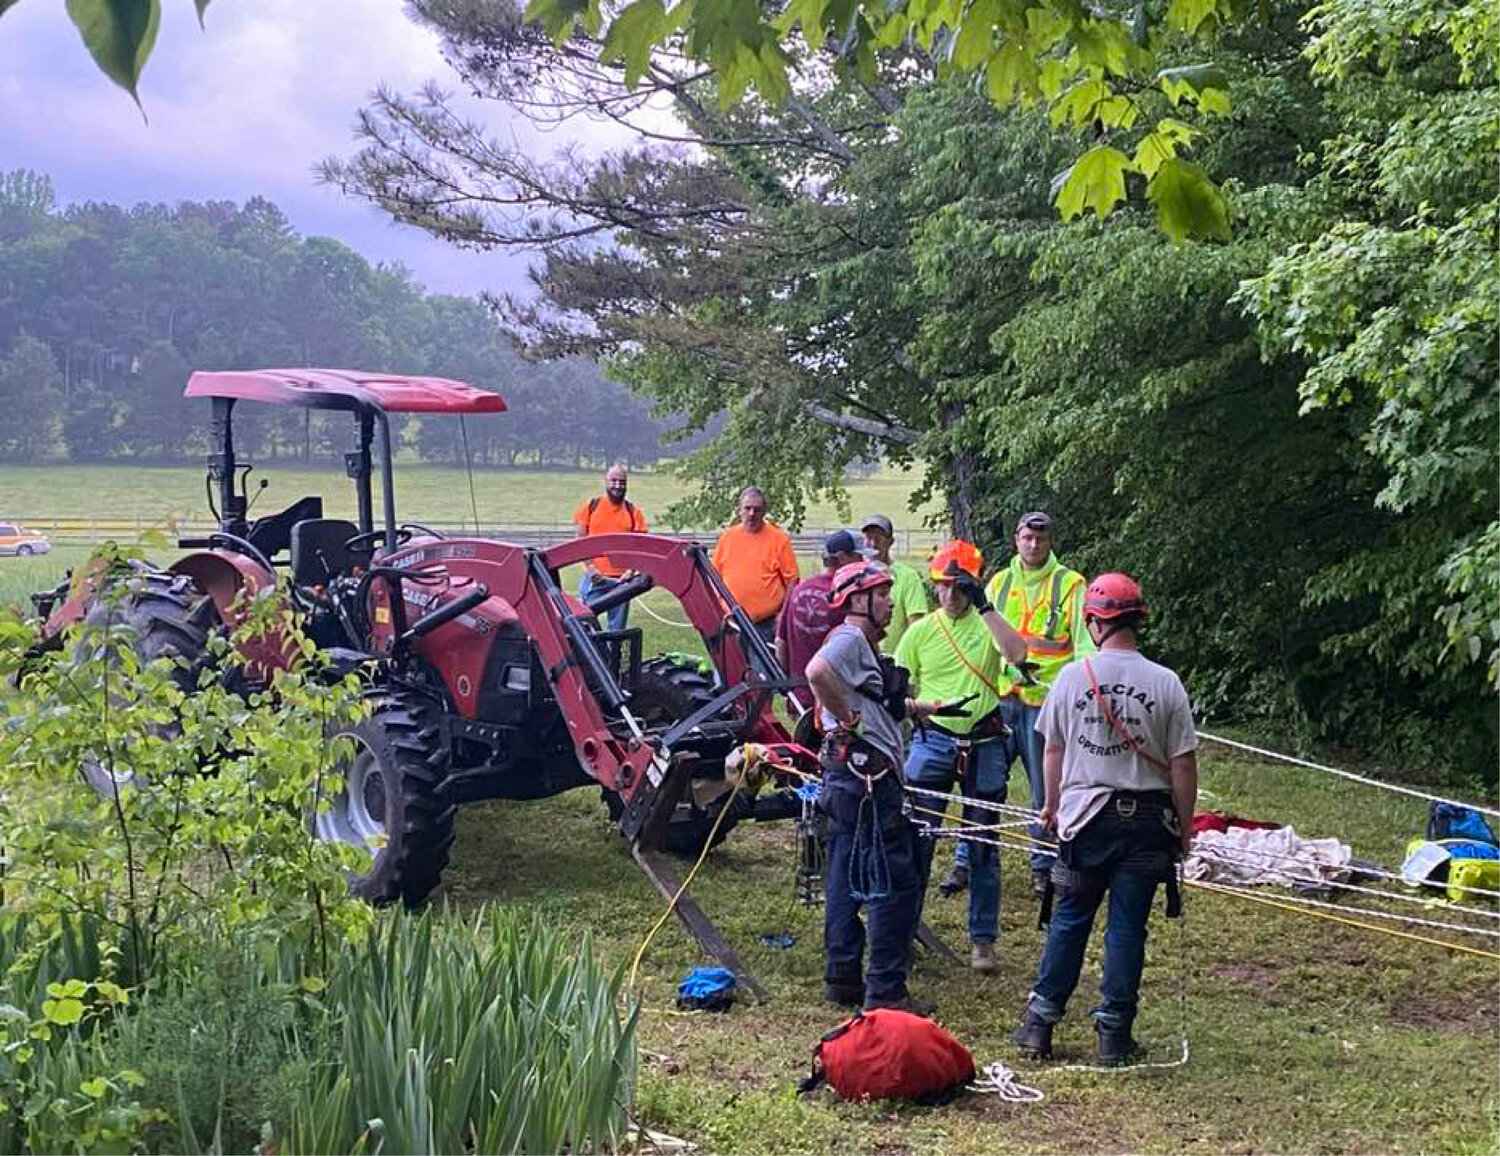 Sparta-White County Rescue Squad arrived on the scene and set up a rope system to lower a member of the team over the bluff, with a small animal harness to assist in retrieval of a dog.